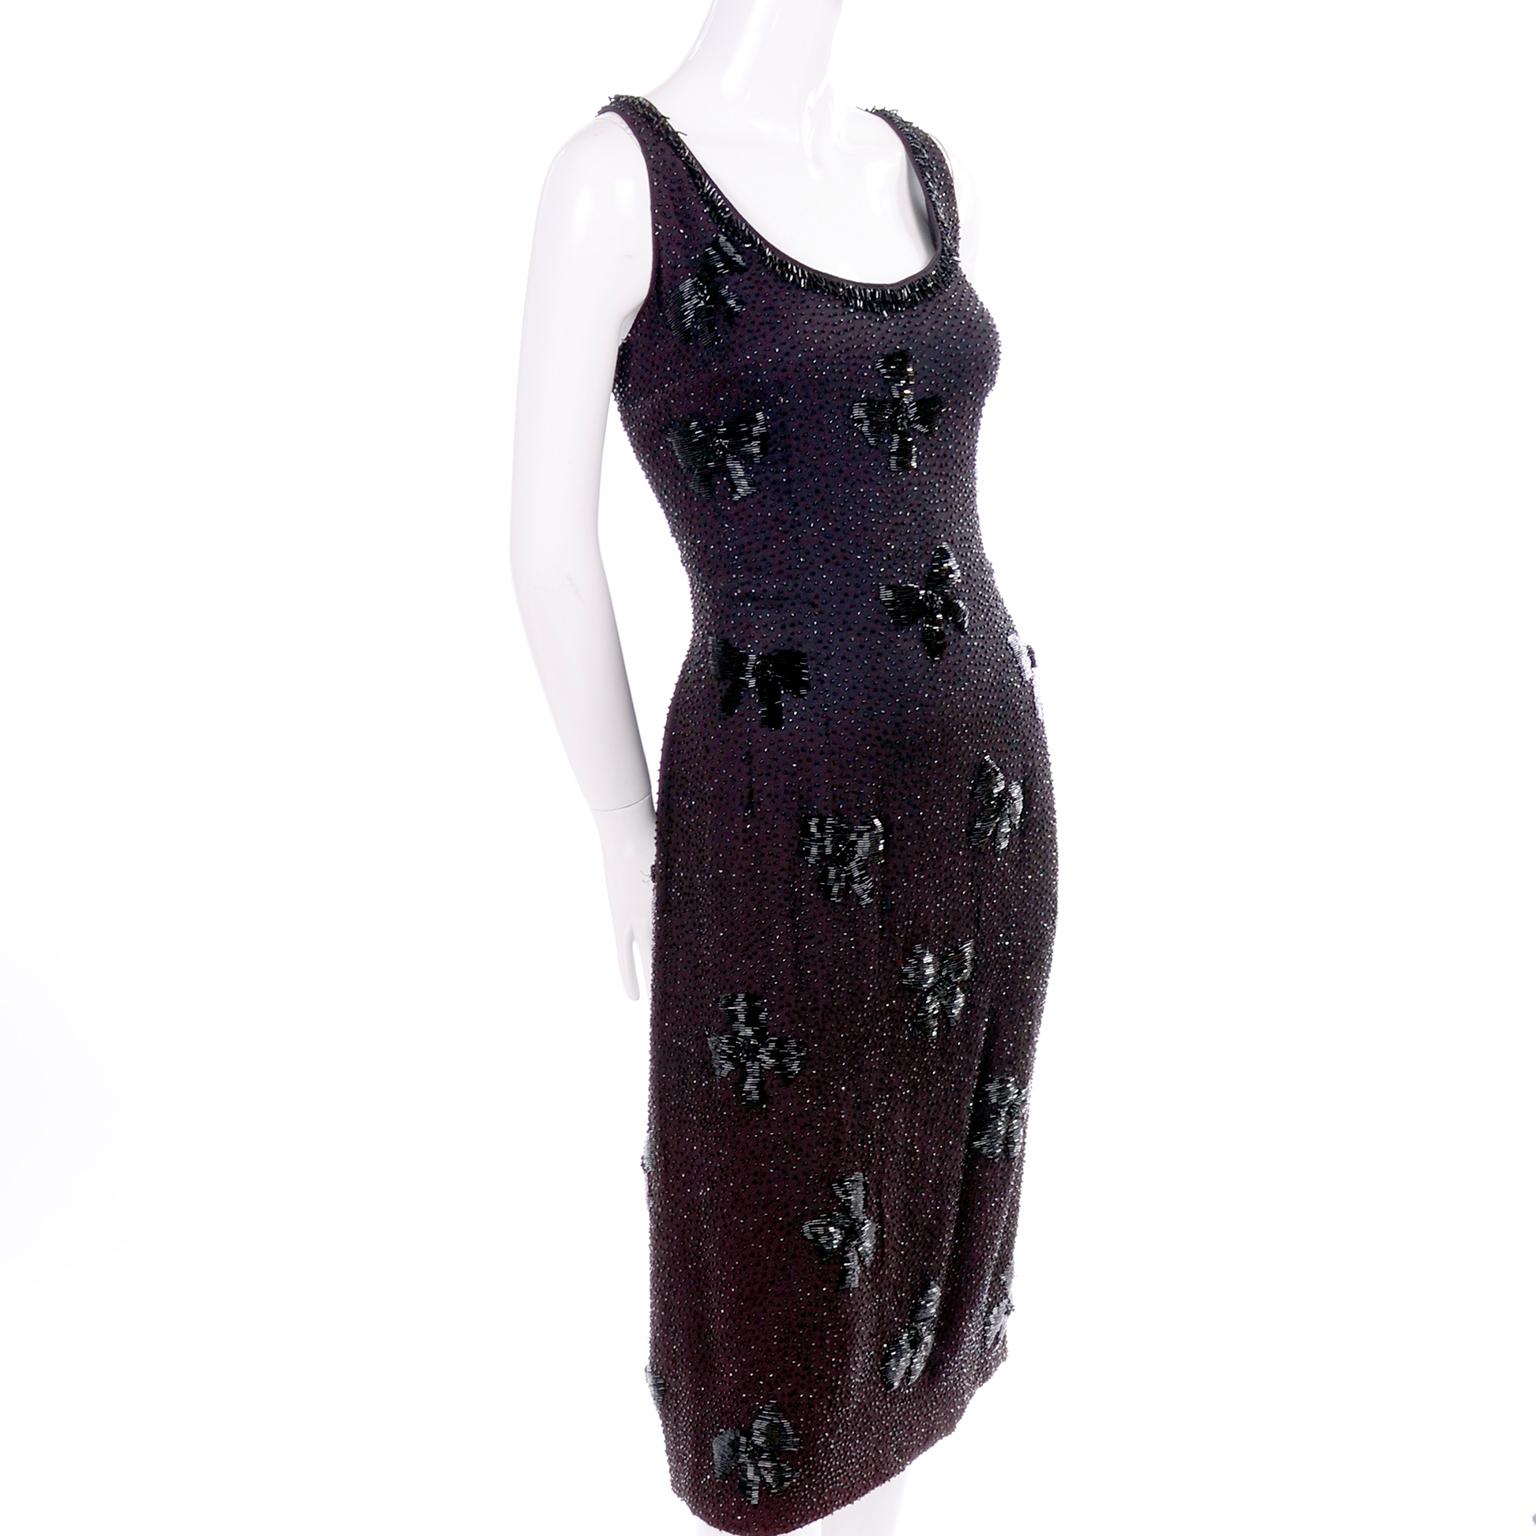 This is a beautiful black silk evening dress with lovely, intricate beading. The heavily beaded design creates a bow print across the dress! There are dangling bugle beads across the neckline and we estimate this dress to fit a modern day size